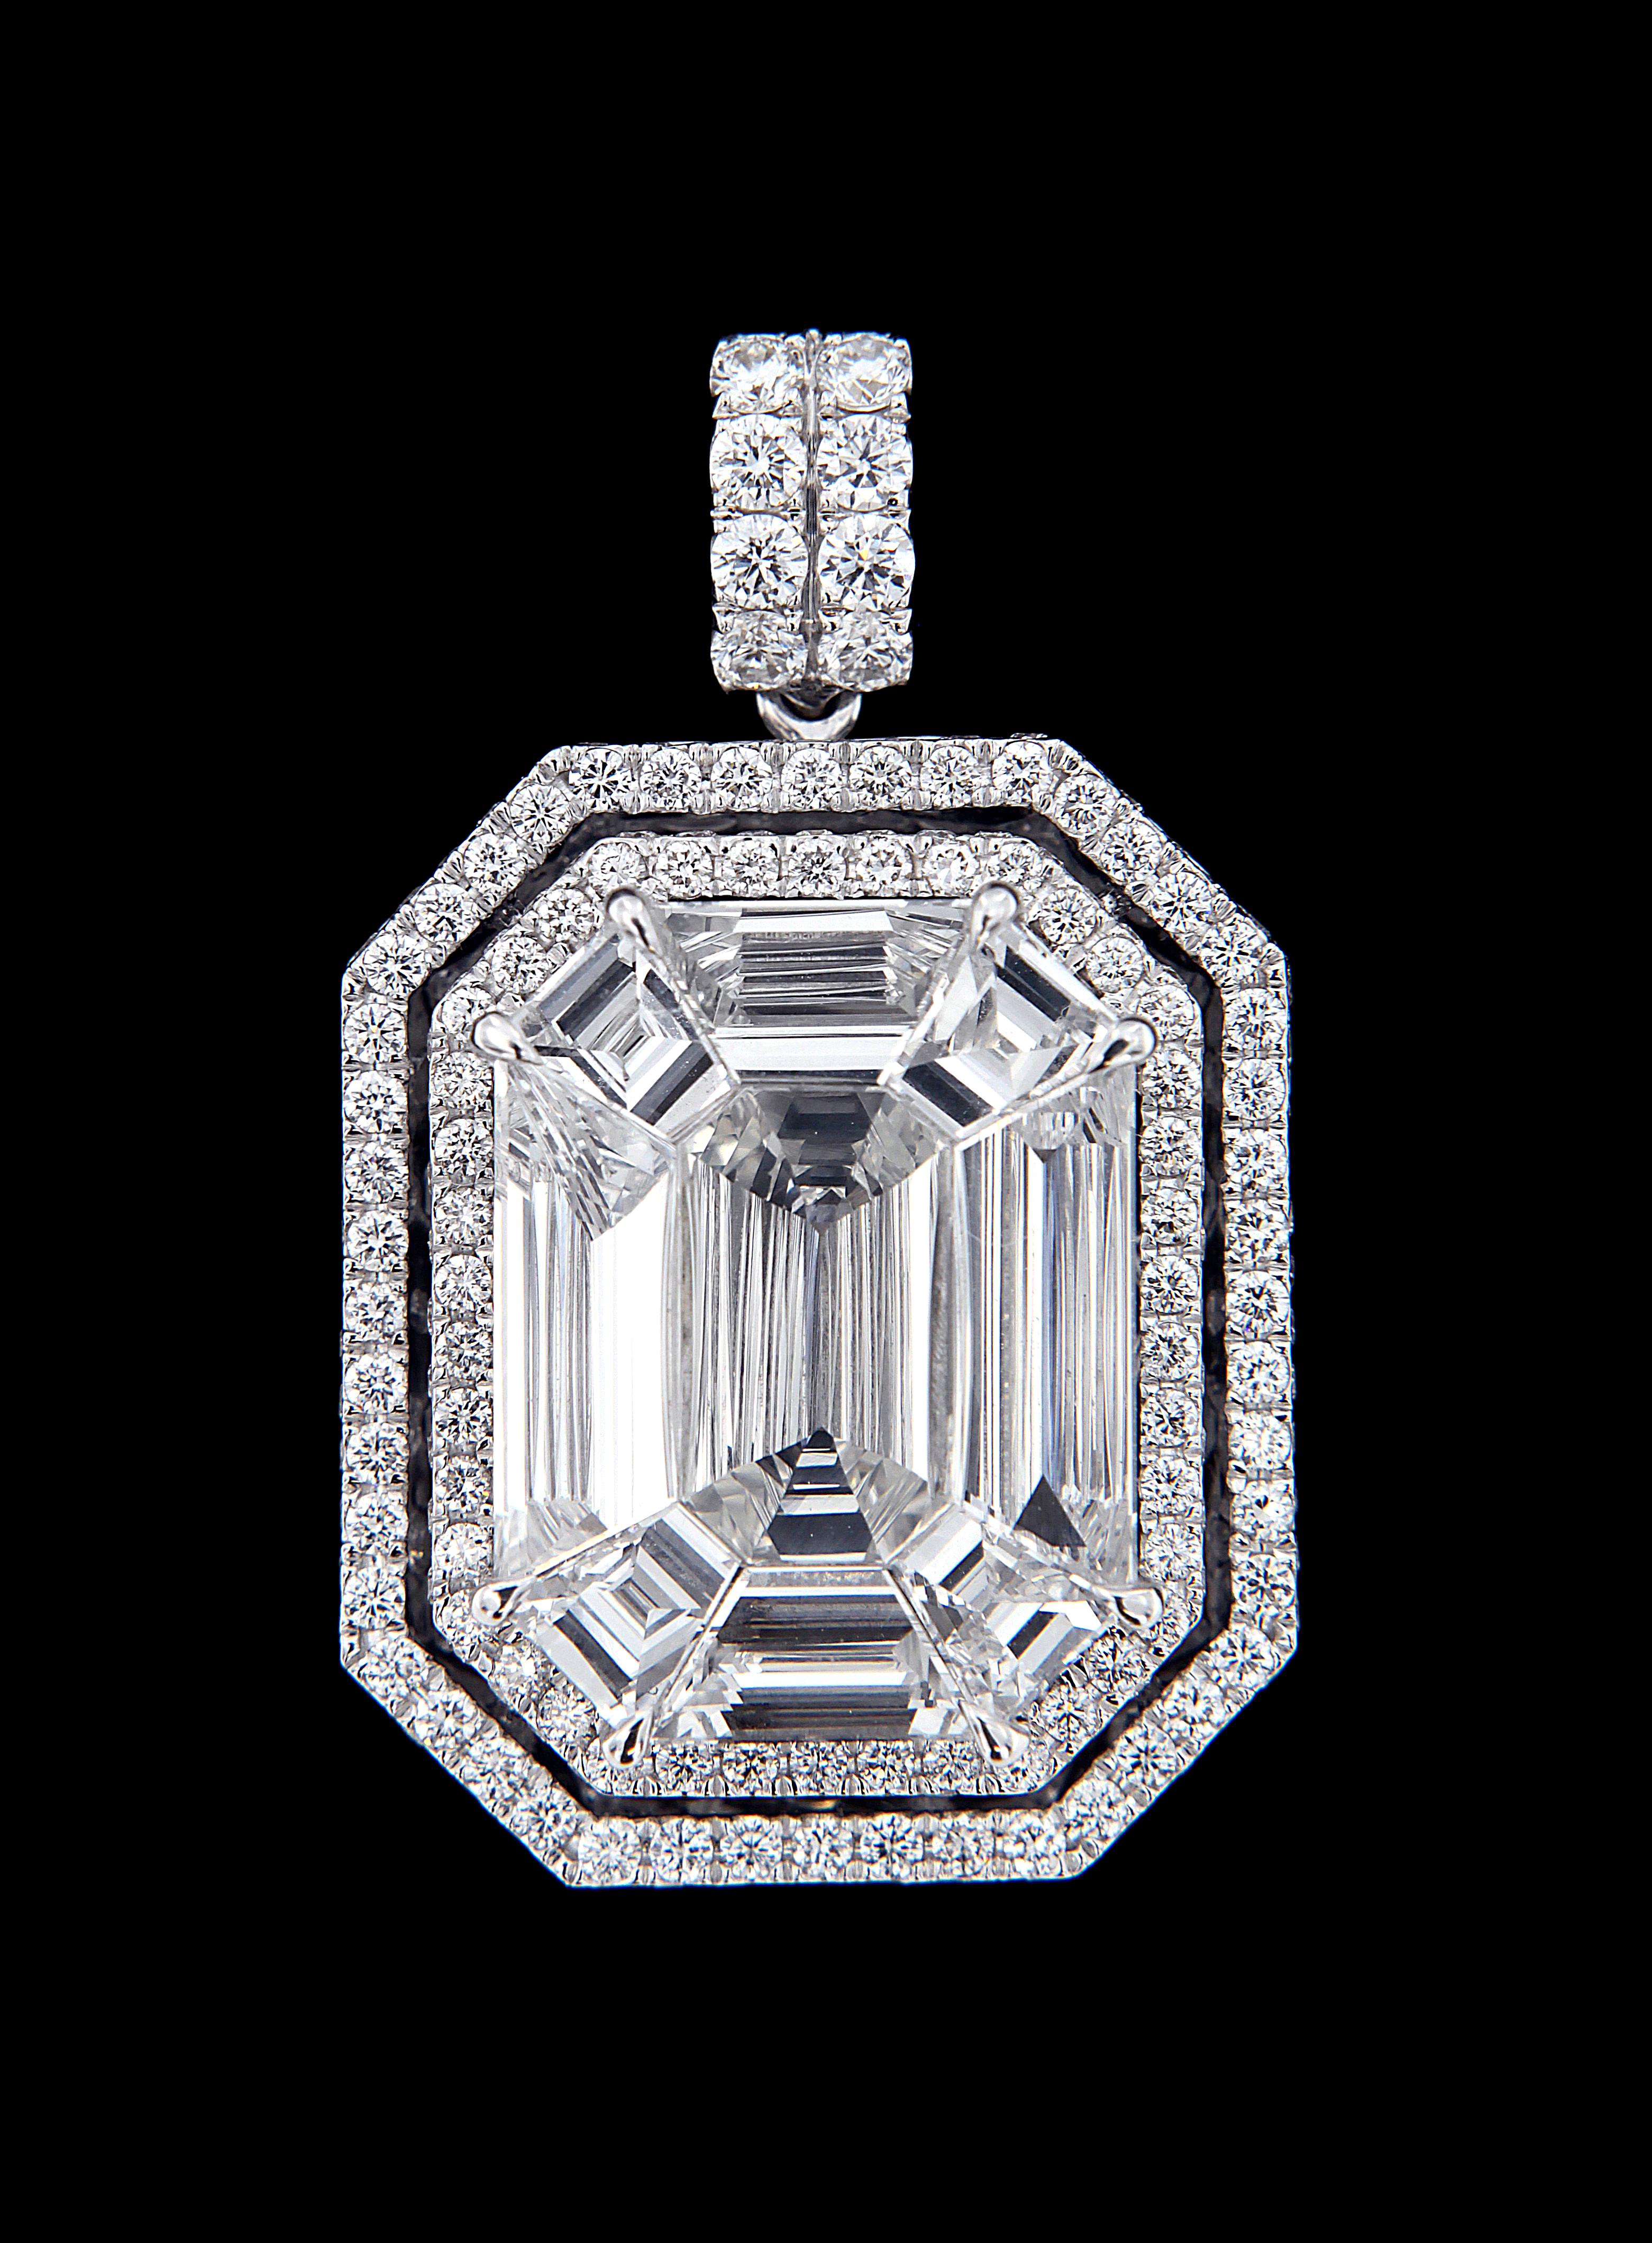  Spectacular 18 Karat White Gold And Diamond Pendant 

Pendants:
Diamonds of approximately 7.549 carats mounted on 18 karat white gold pendants. The pendant weighs approximately around 6.91 grams.

Please note: The charges specified do not include